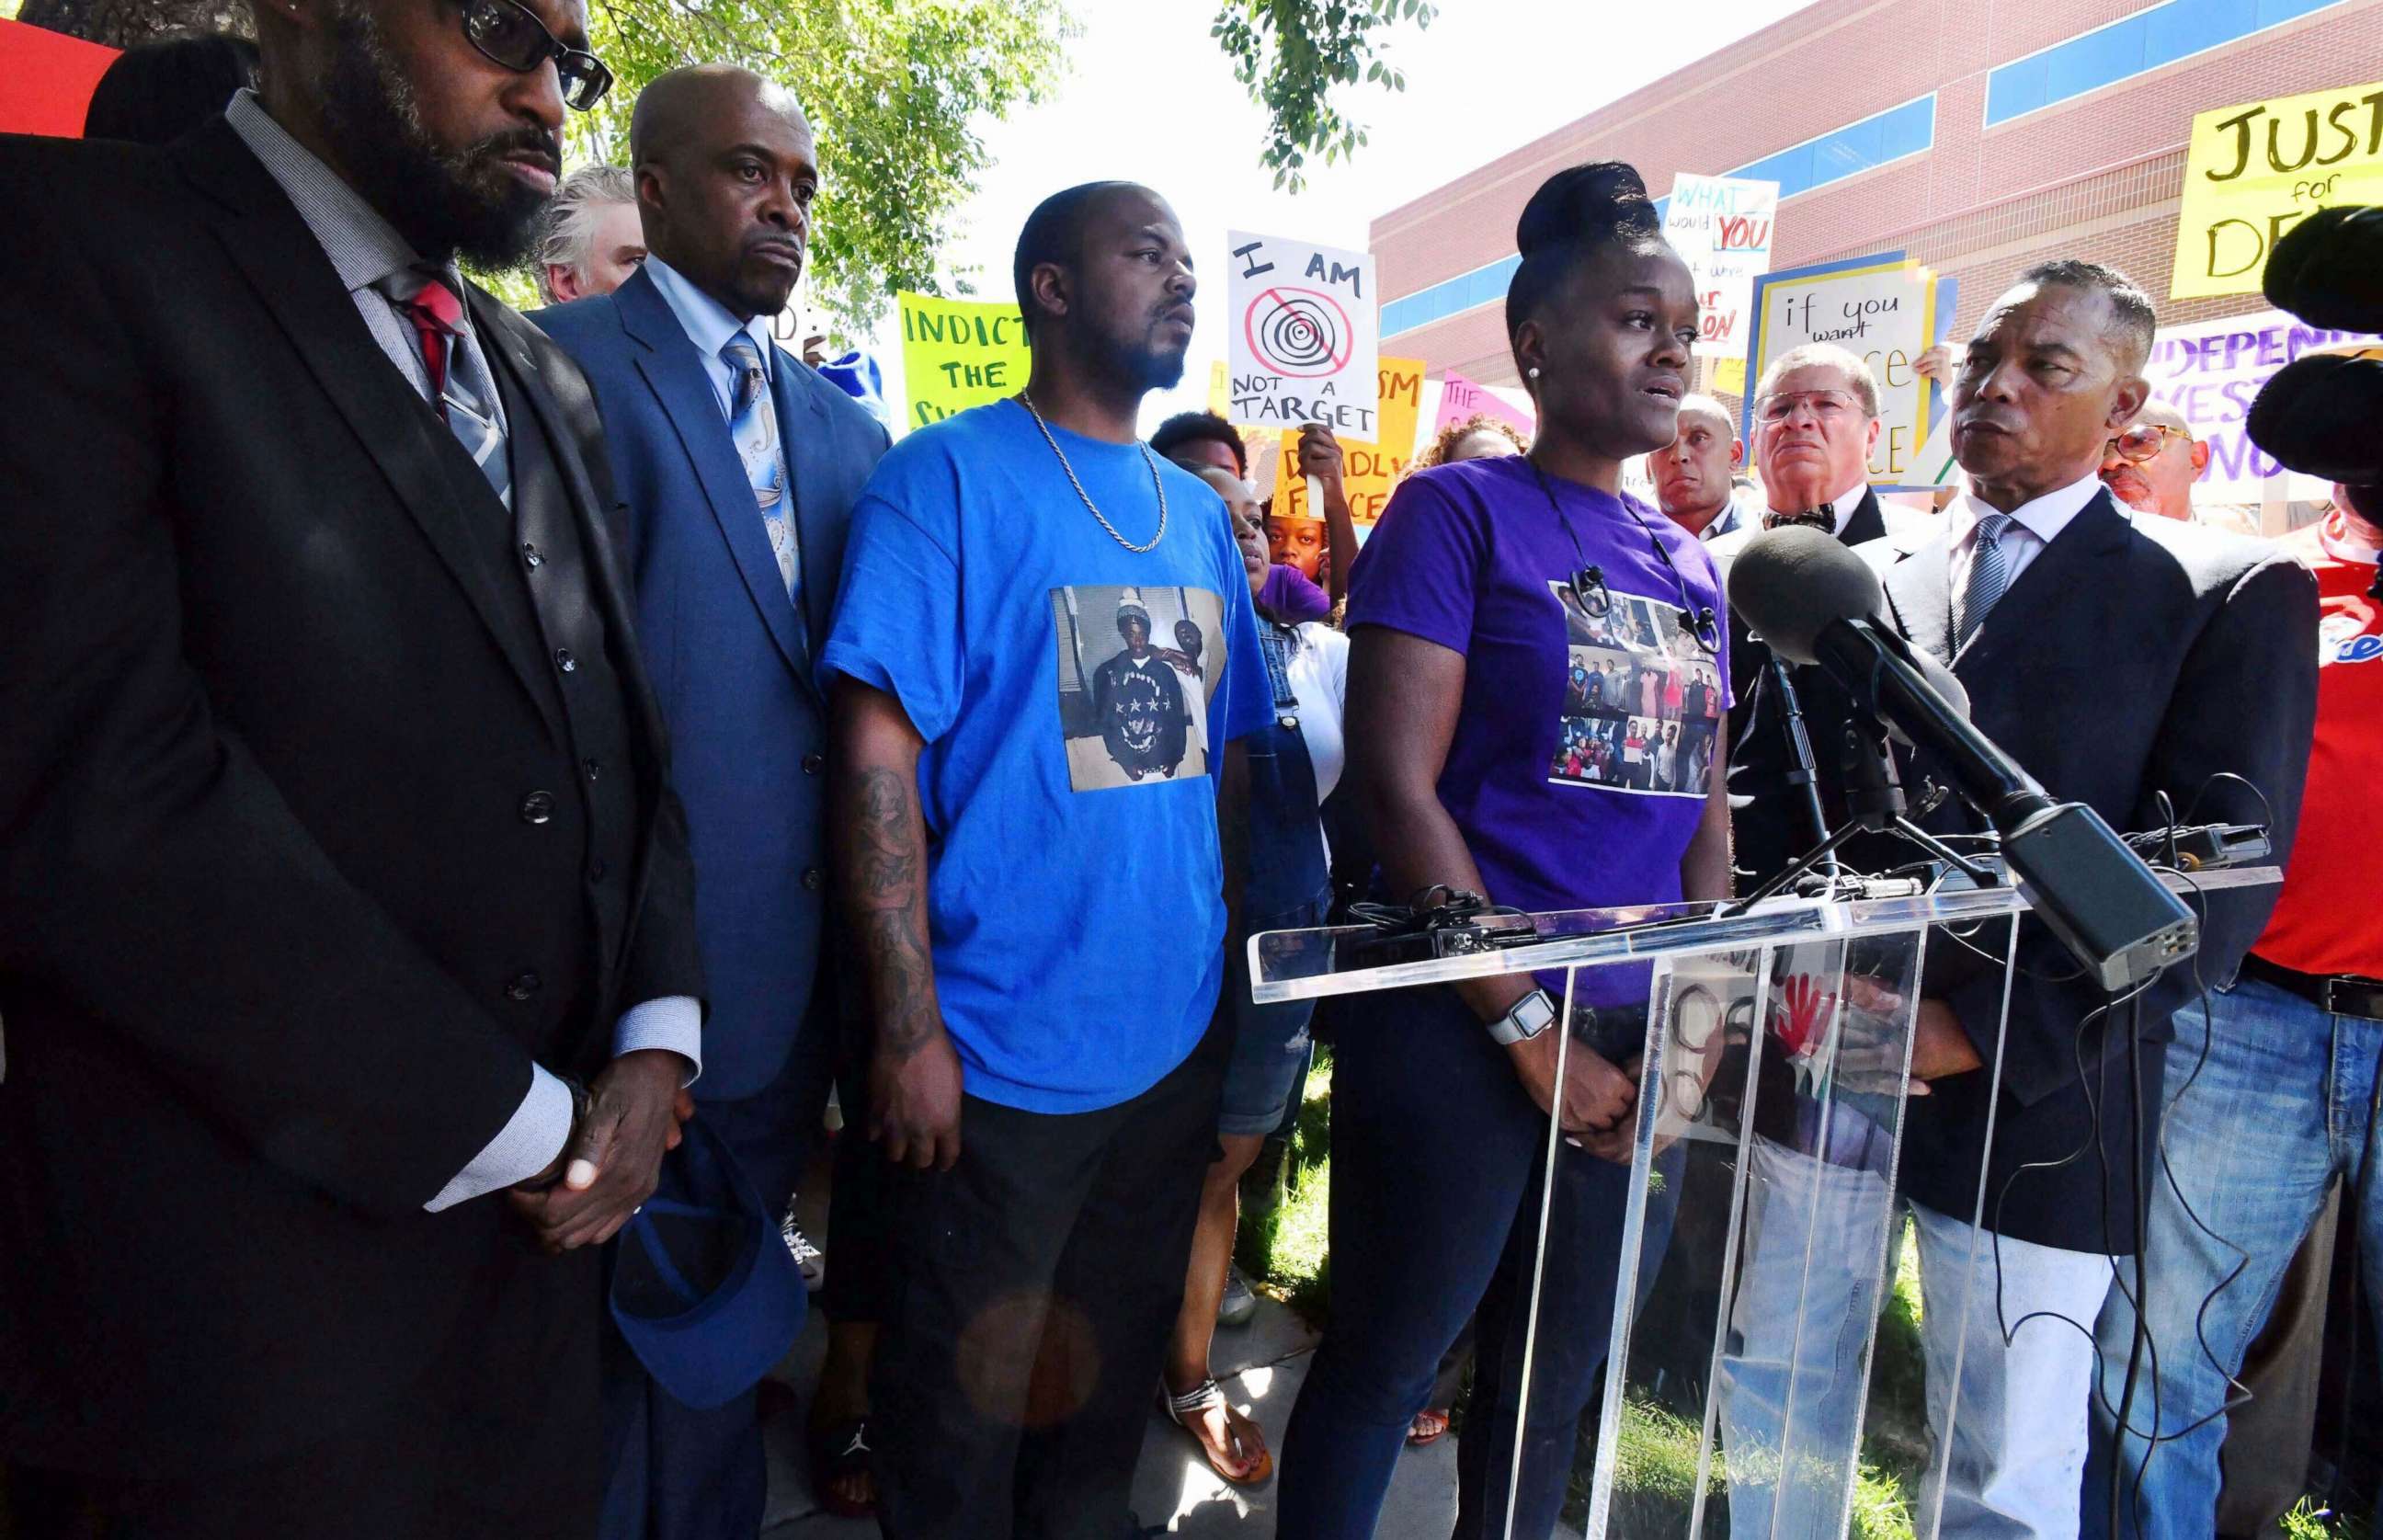 PHOTO: Delisha Searcy, mother of De'Von Bailey, at podium, speaks at a news conference in front of the Colorado Springs Police Department Police Operations Center, Tuesday, Aug. 13, 2019, in Colorado Springs, Colo.